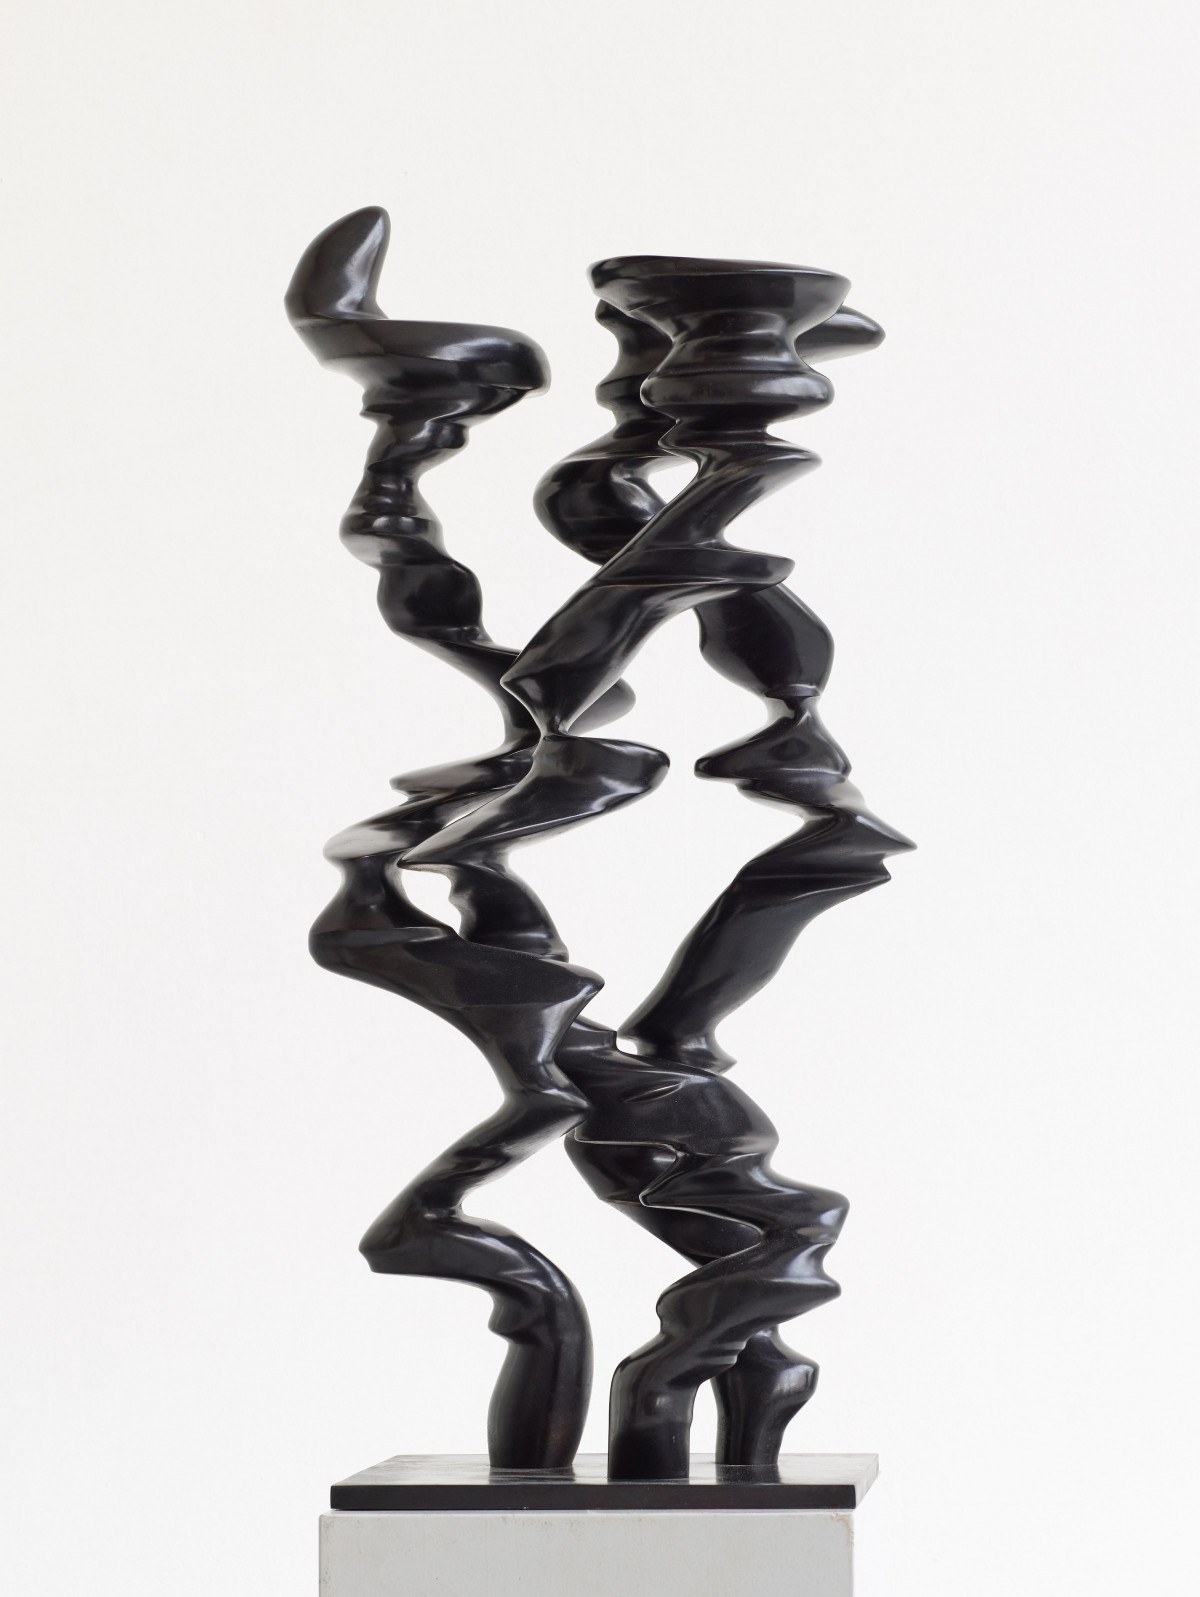 Tony Cragg, ‘Points of View’, 2019